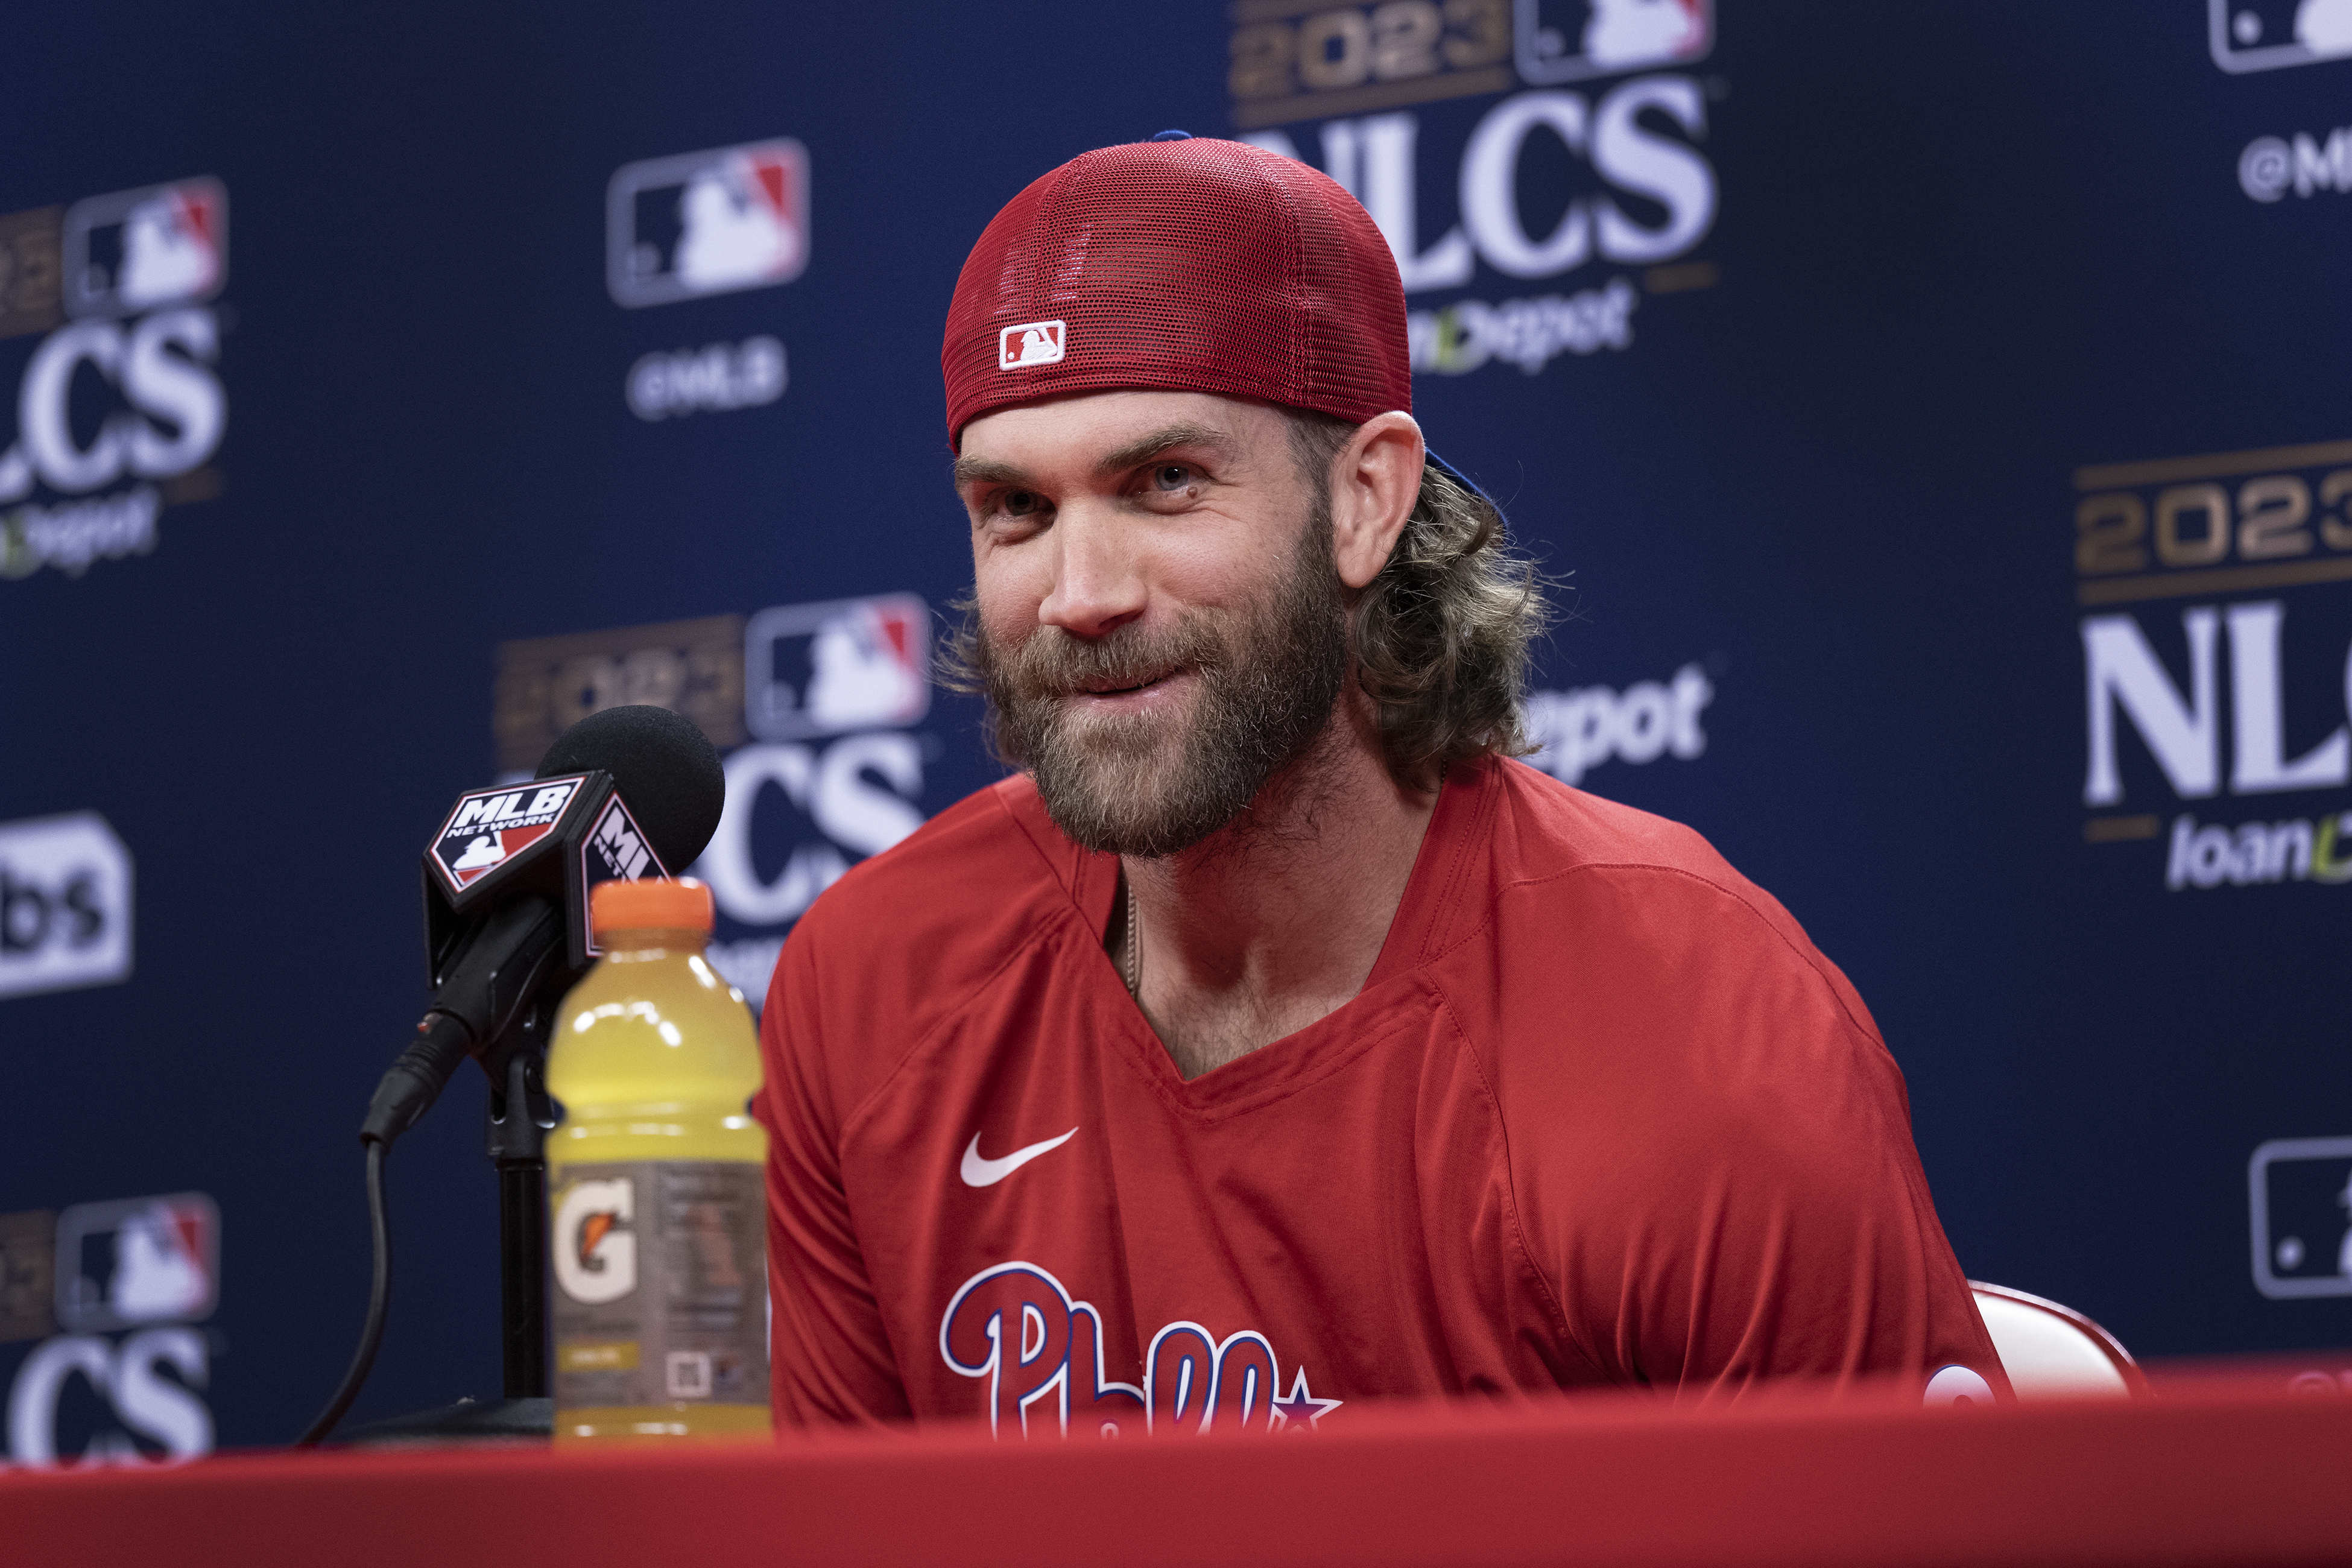 Bryce Harper's birthday wishes come true with a Phillies win in